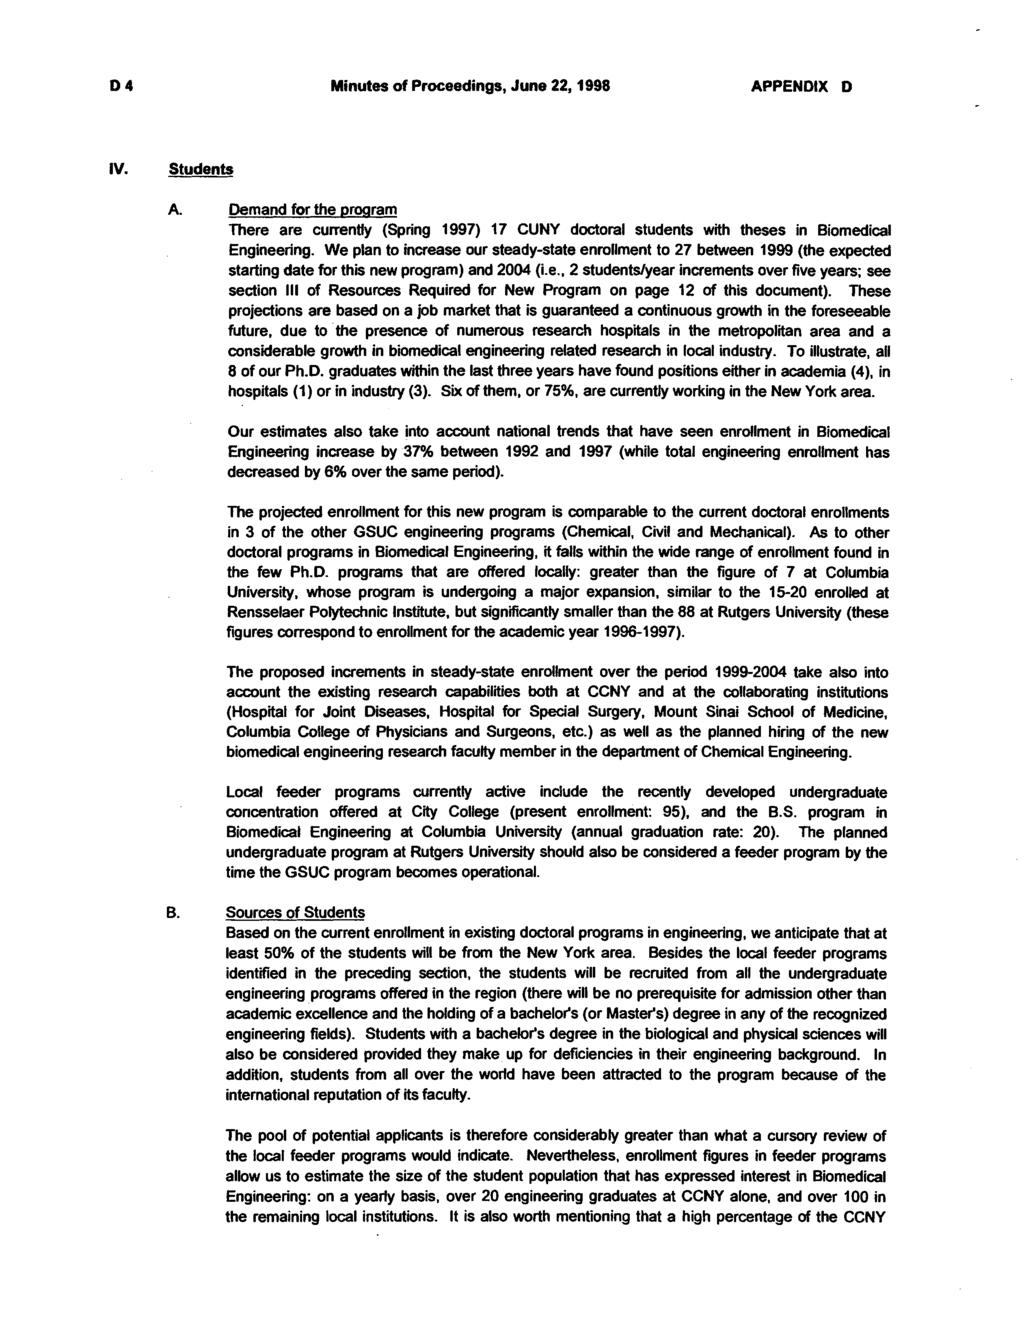 Minutes of Proceedings, June 22,1998 APPENDIX D IV. Students A. Demand for the prwram There are currently (Spring 1997) 17 CUNY doctoral students with theses in Biomedical Engineering.